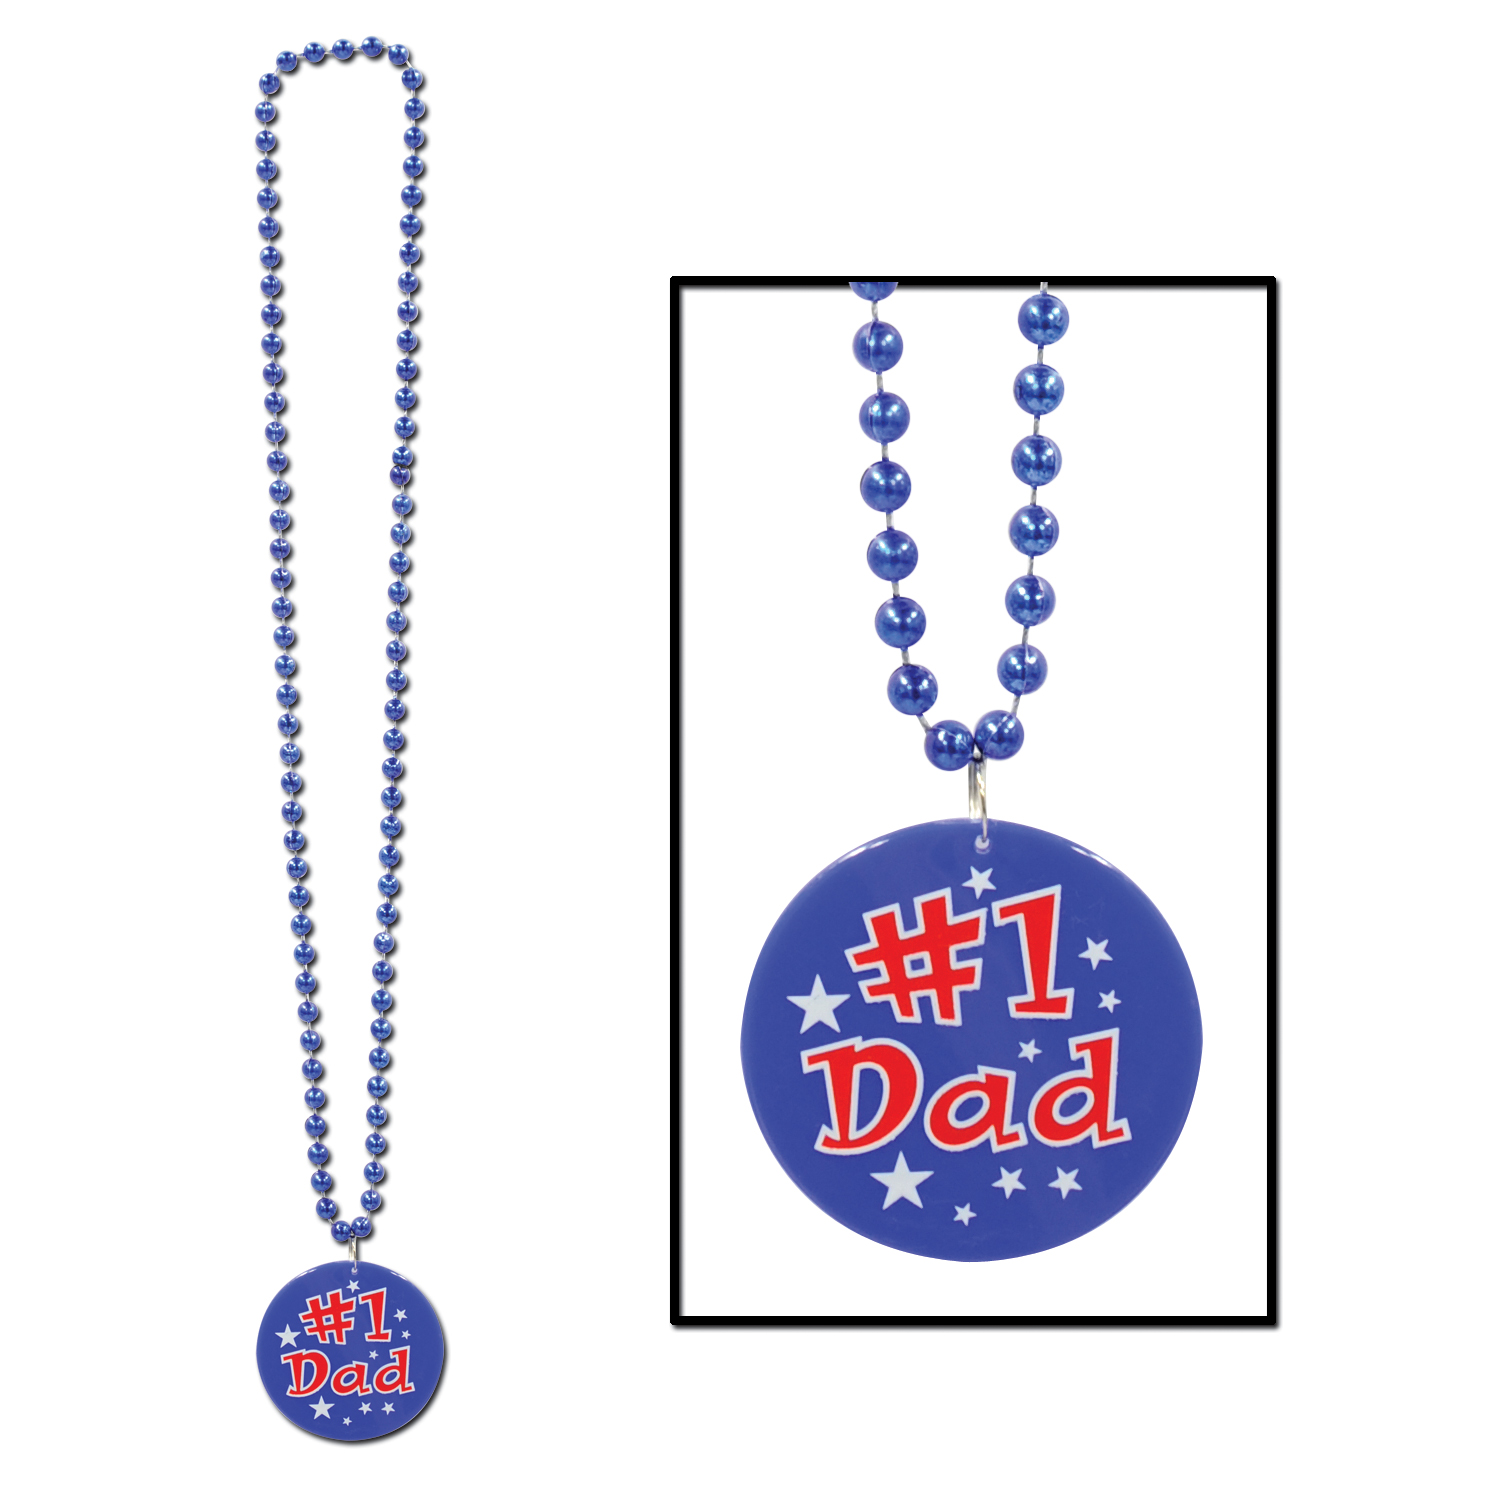 12 Pieces of Beads W/printed #1 Dad Medallion